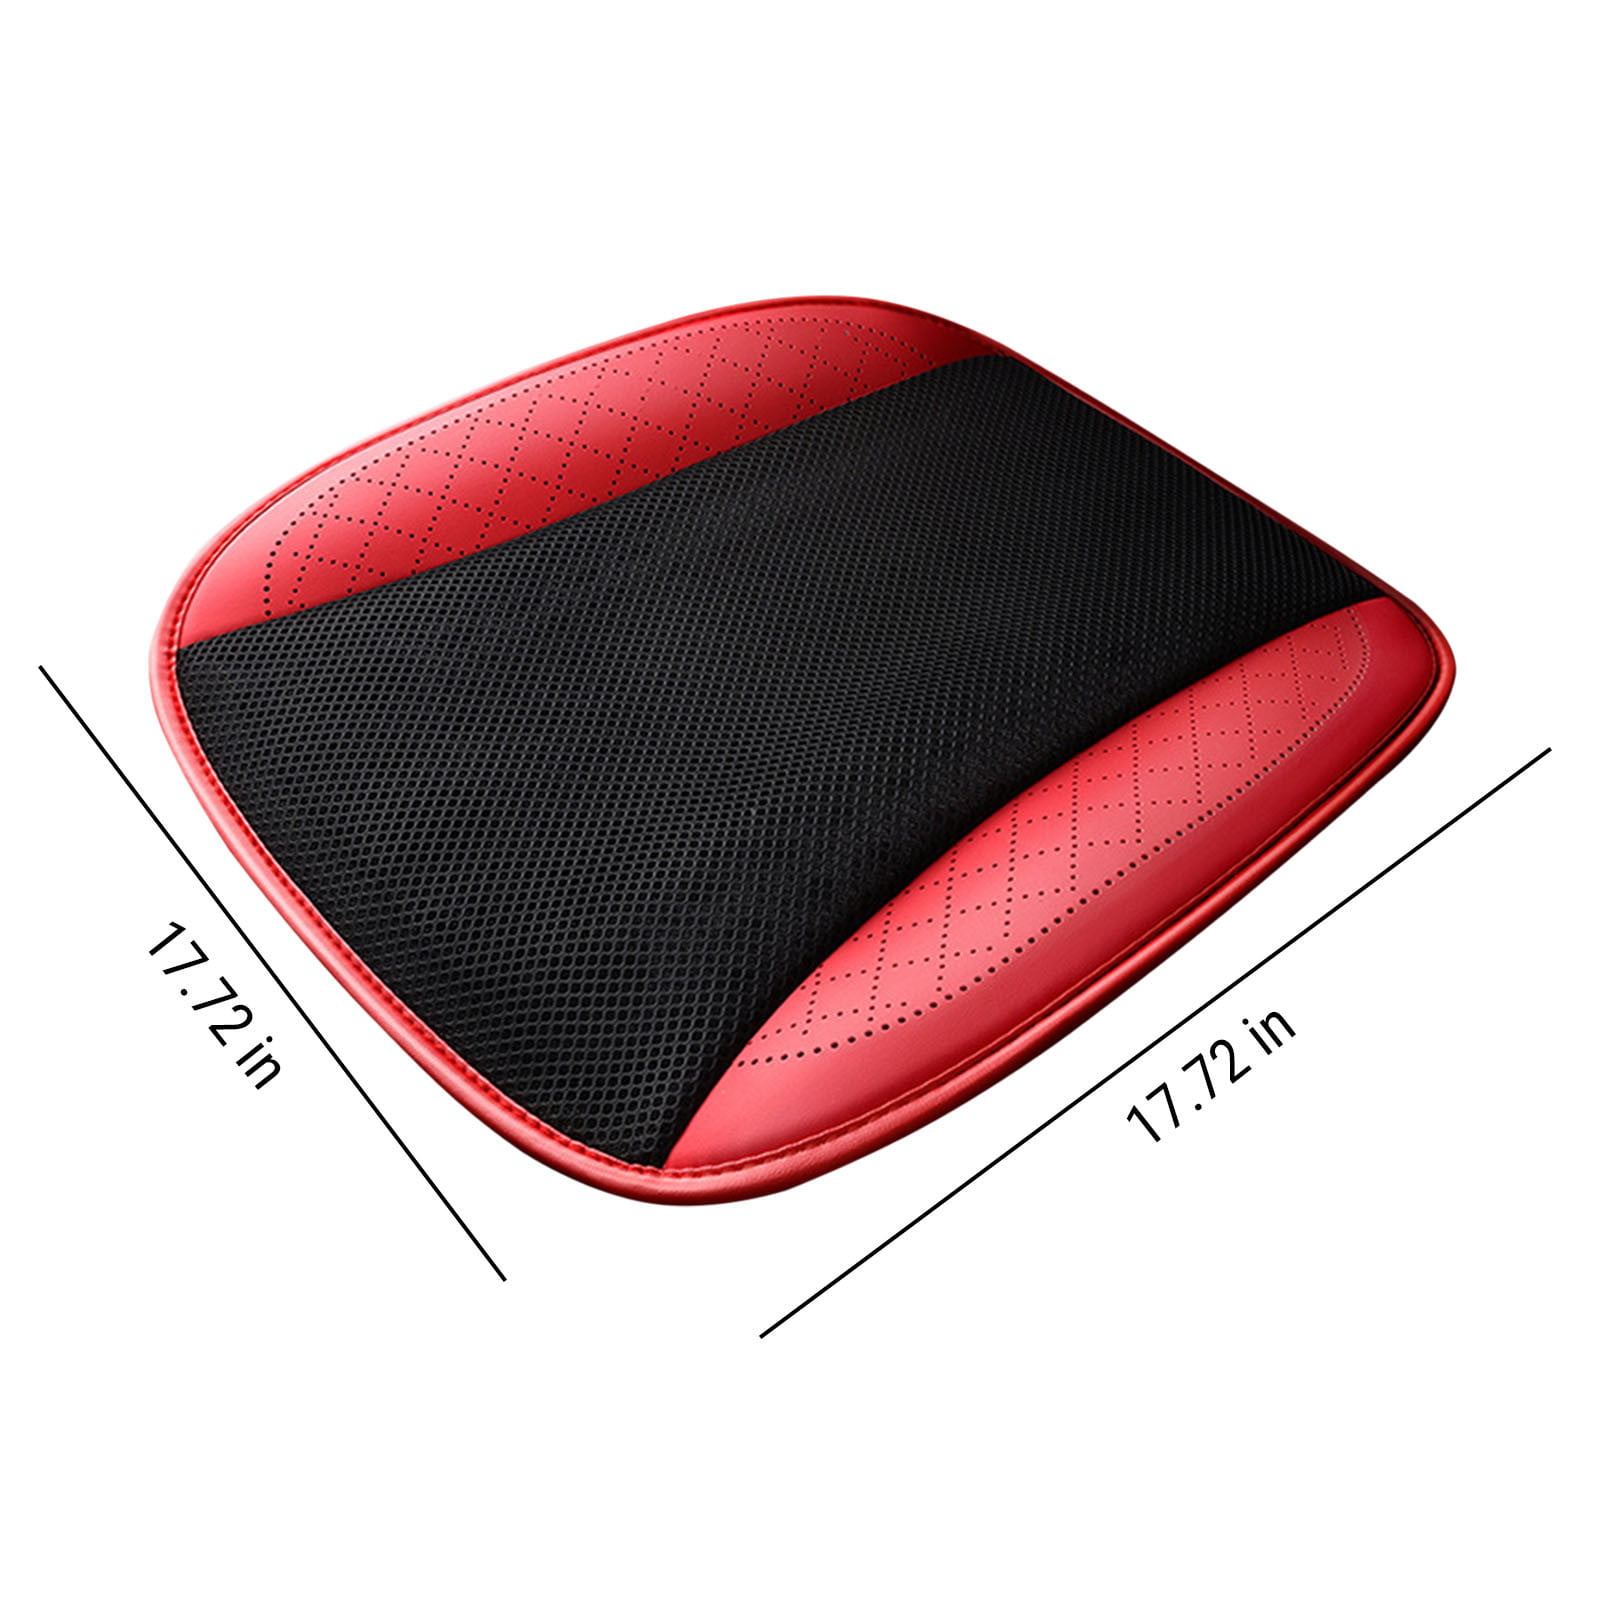  MeiBoAll Standard Size Ventilated Seat Cushion with